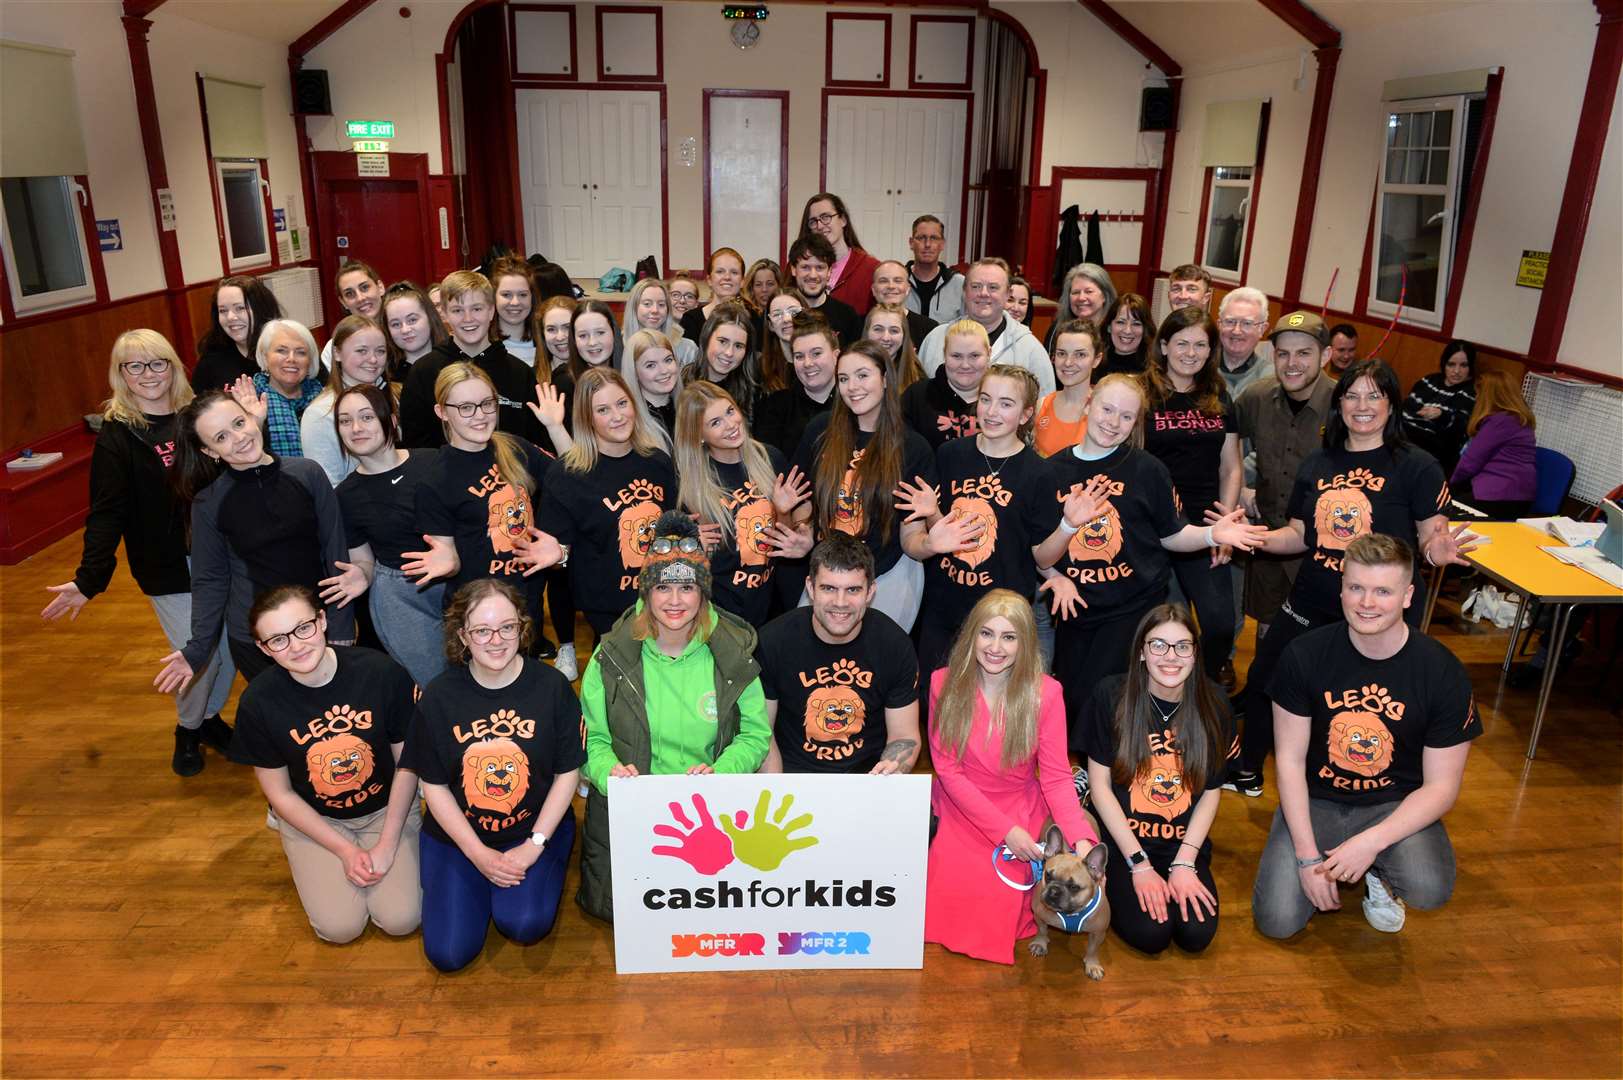 The cast of Inverness Musical Theatre's Legally Blonde production with supporters of MFR Cash for Kids.